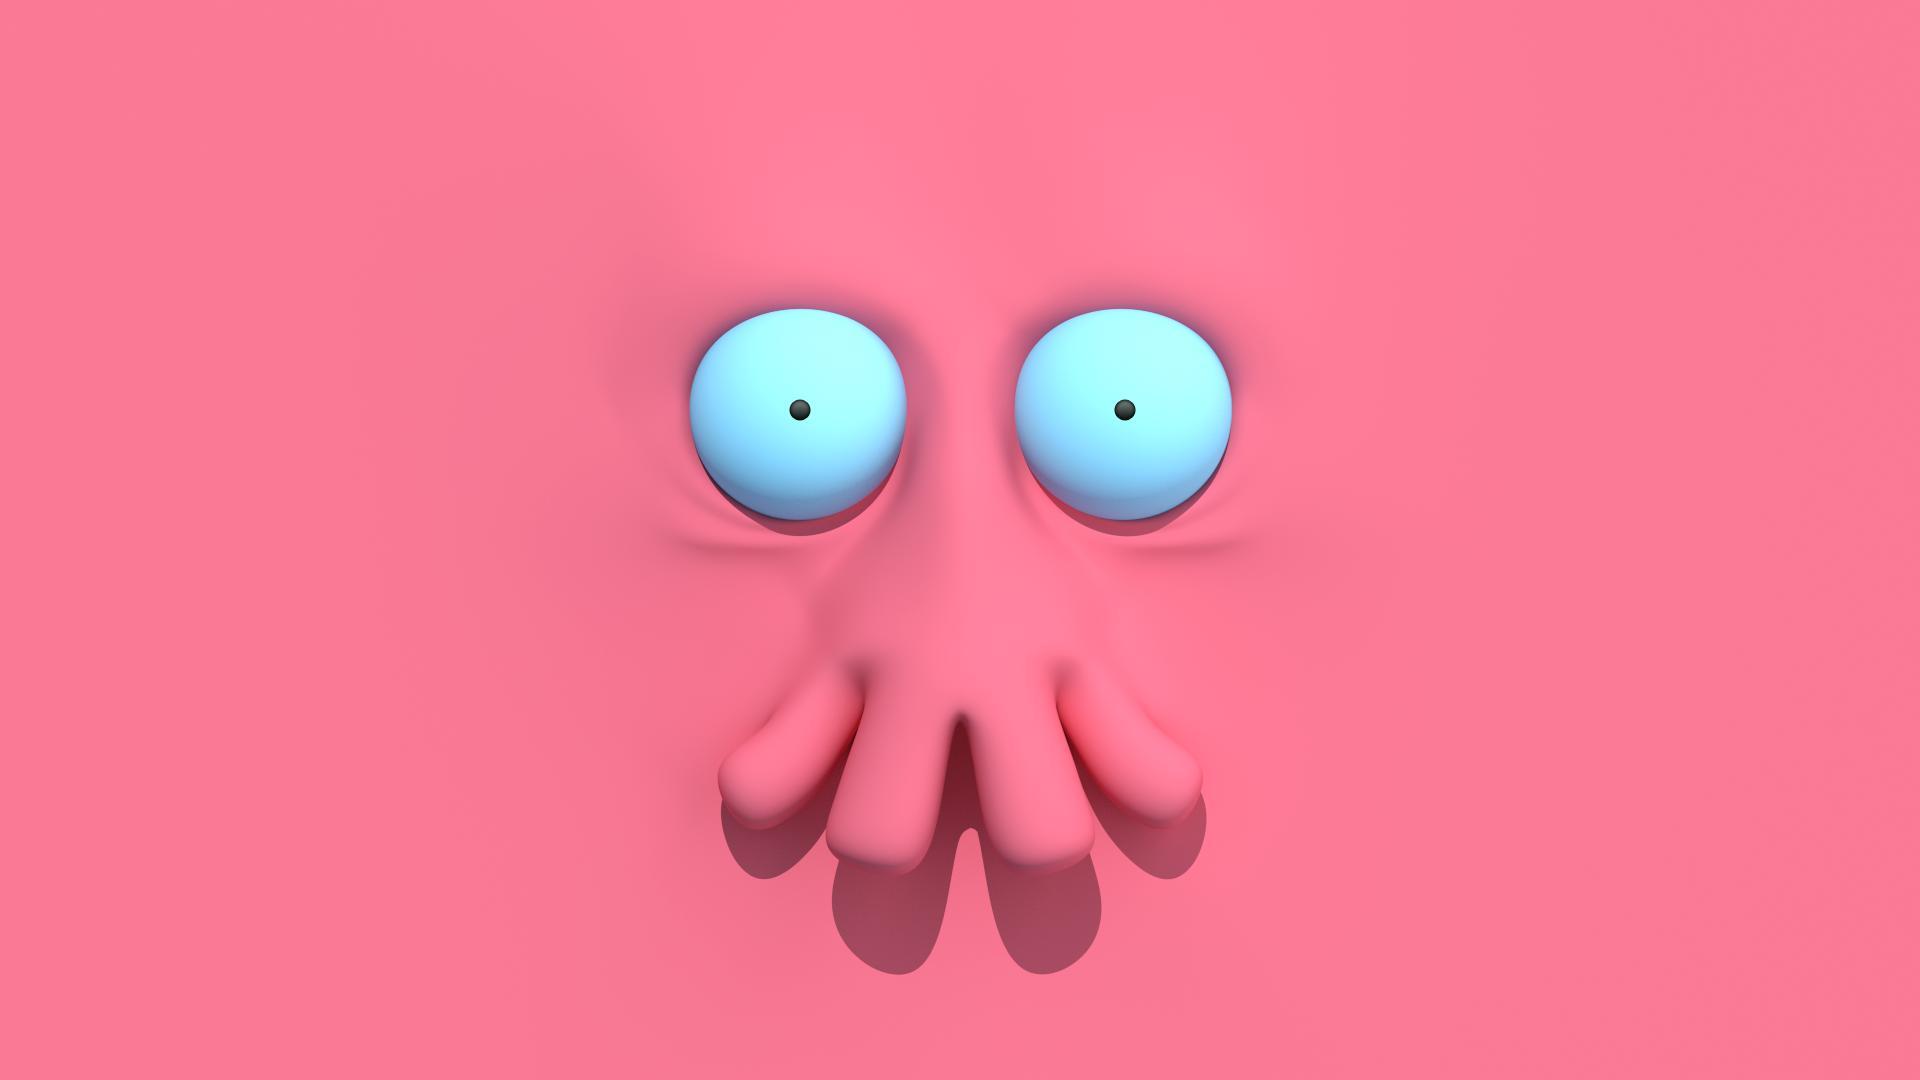 Need a new wallpaper? Why not 3D Zoidberg?